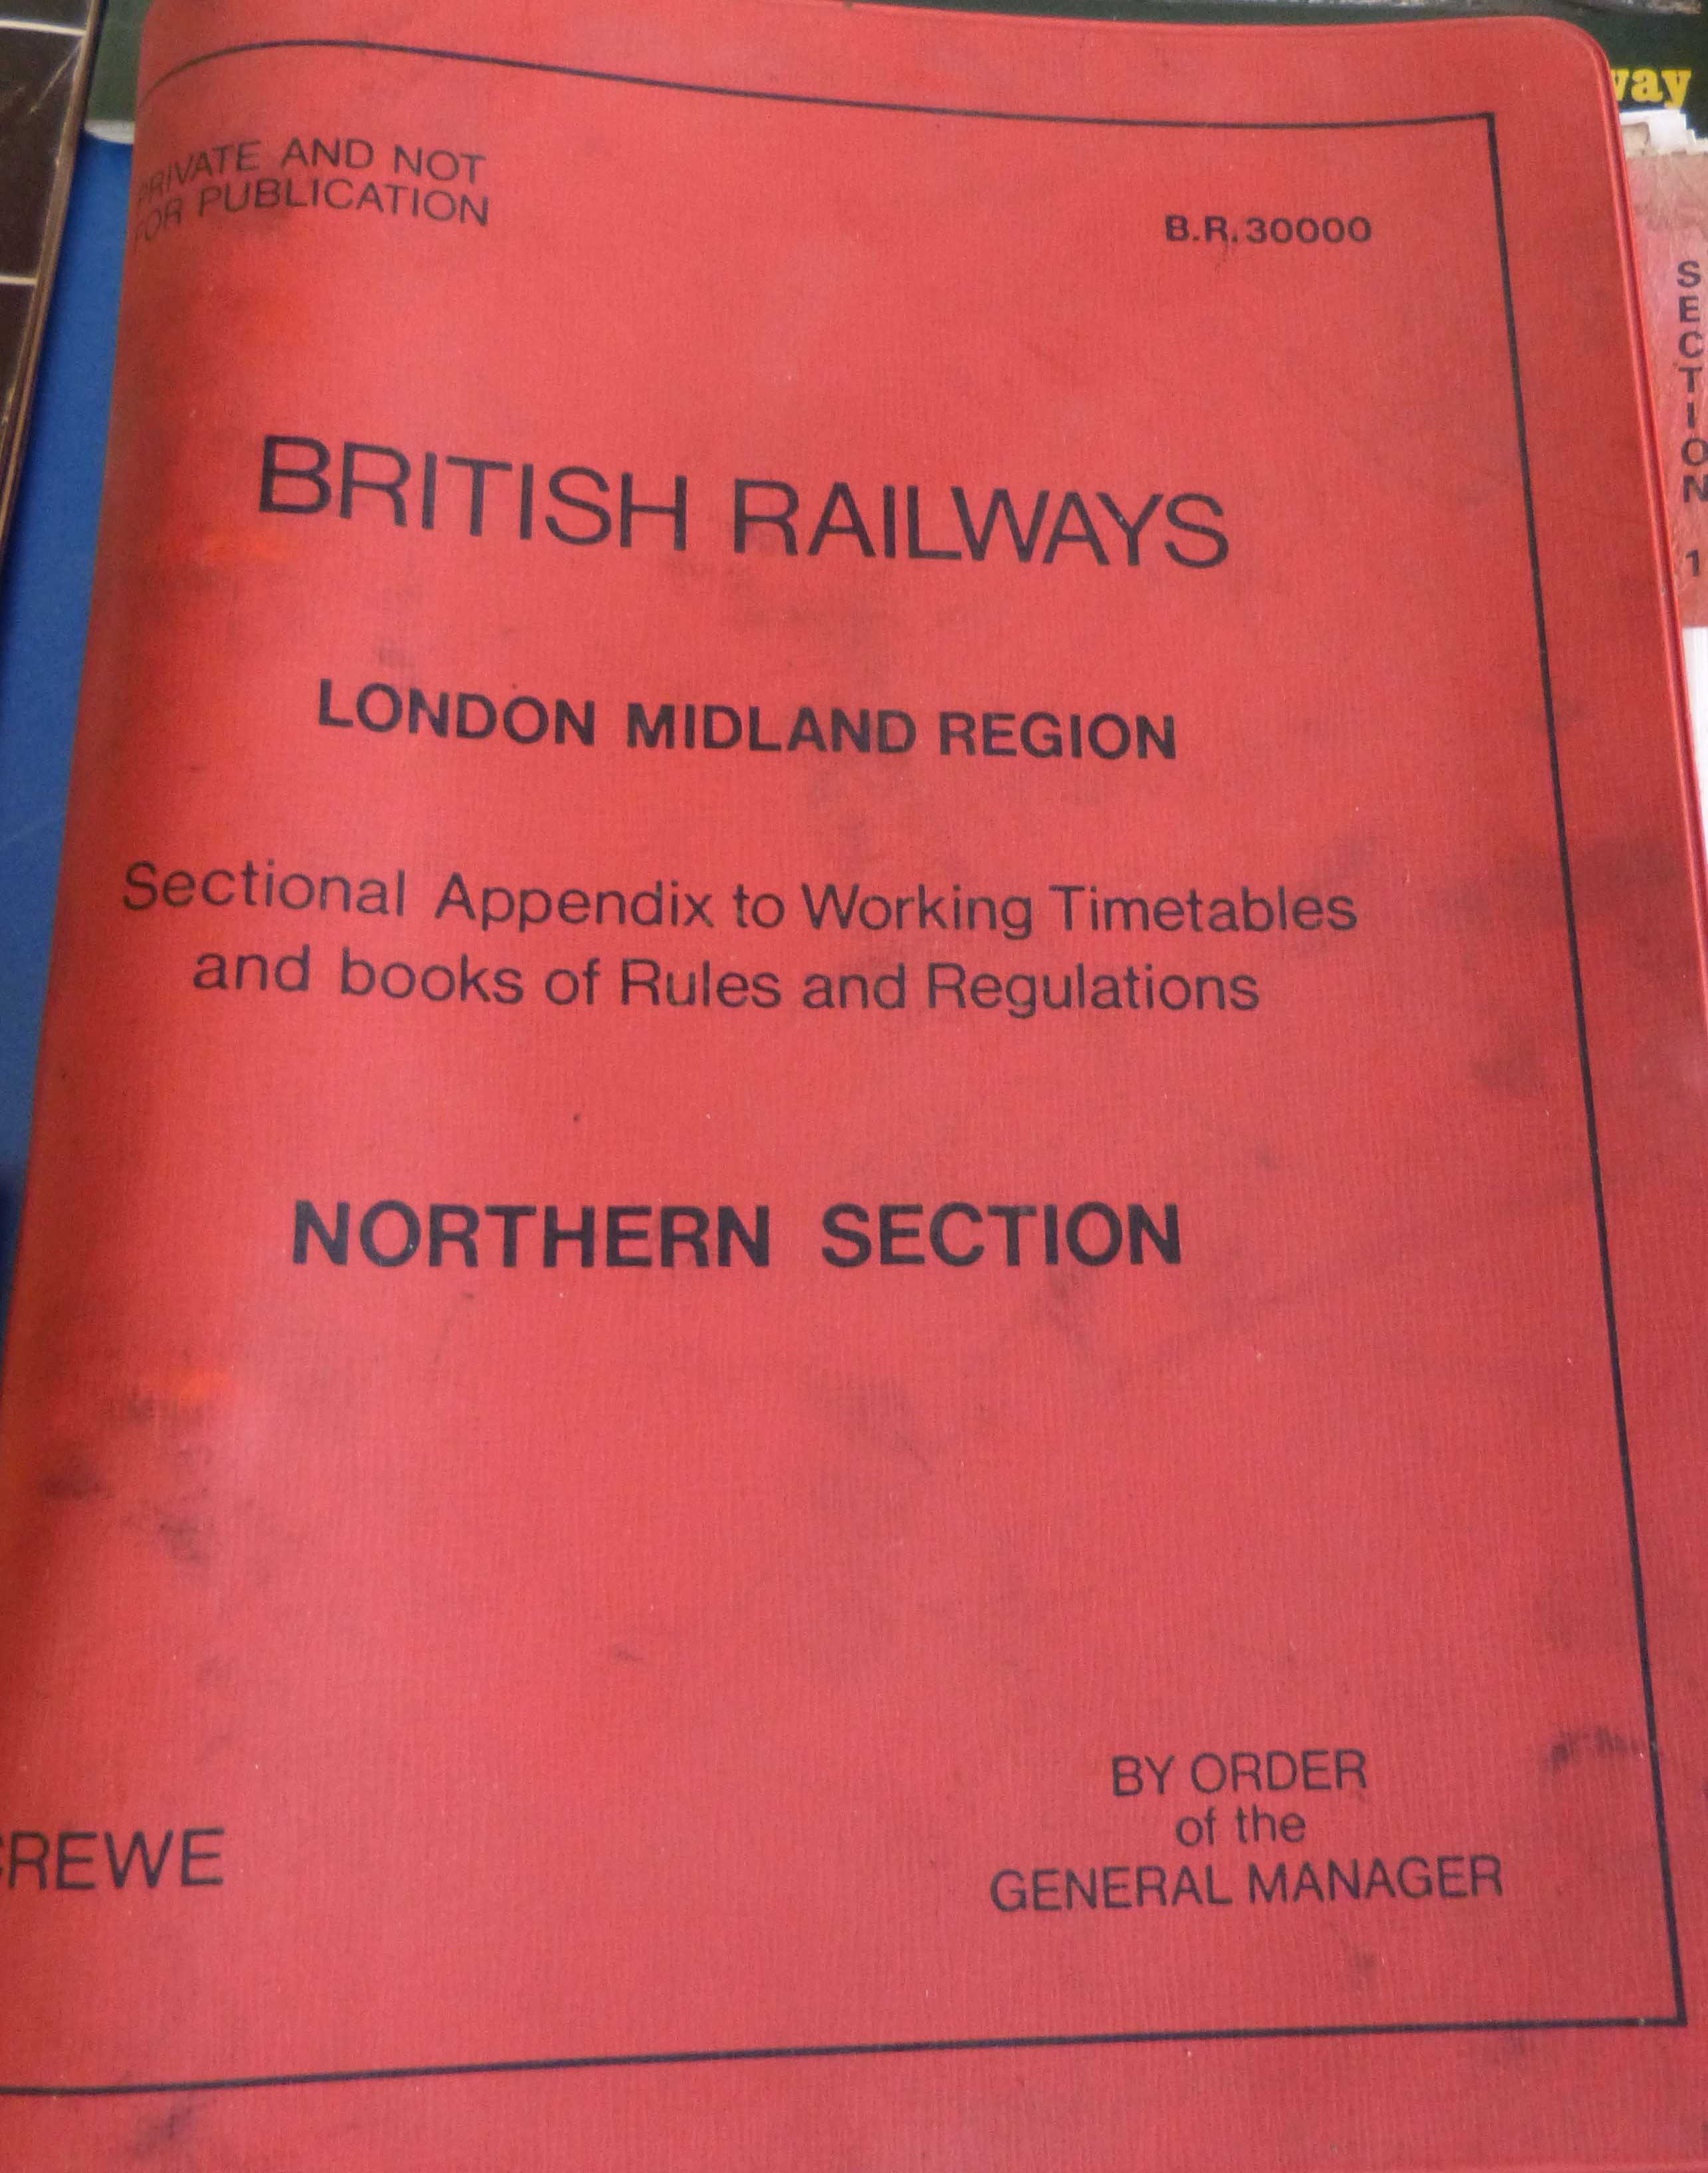 A collection of British railway books and manuals - Image 9 of 9